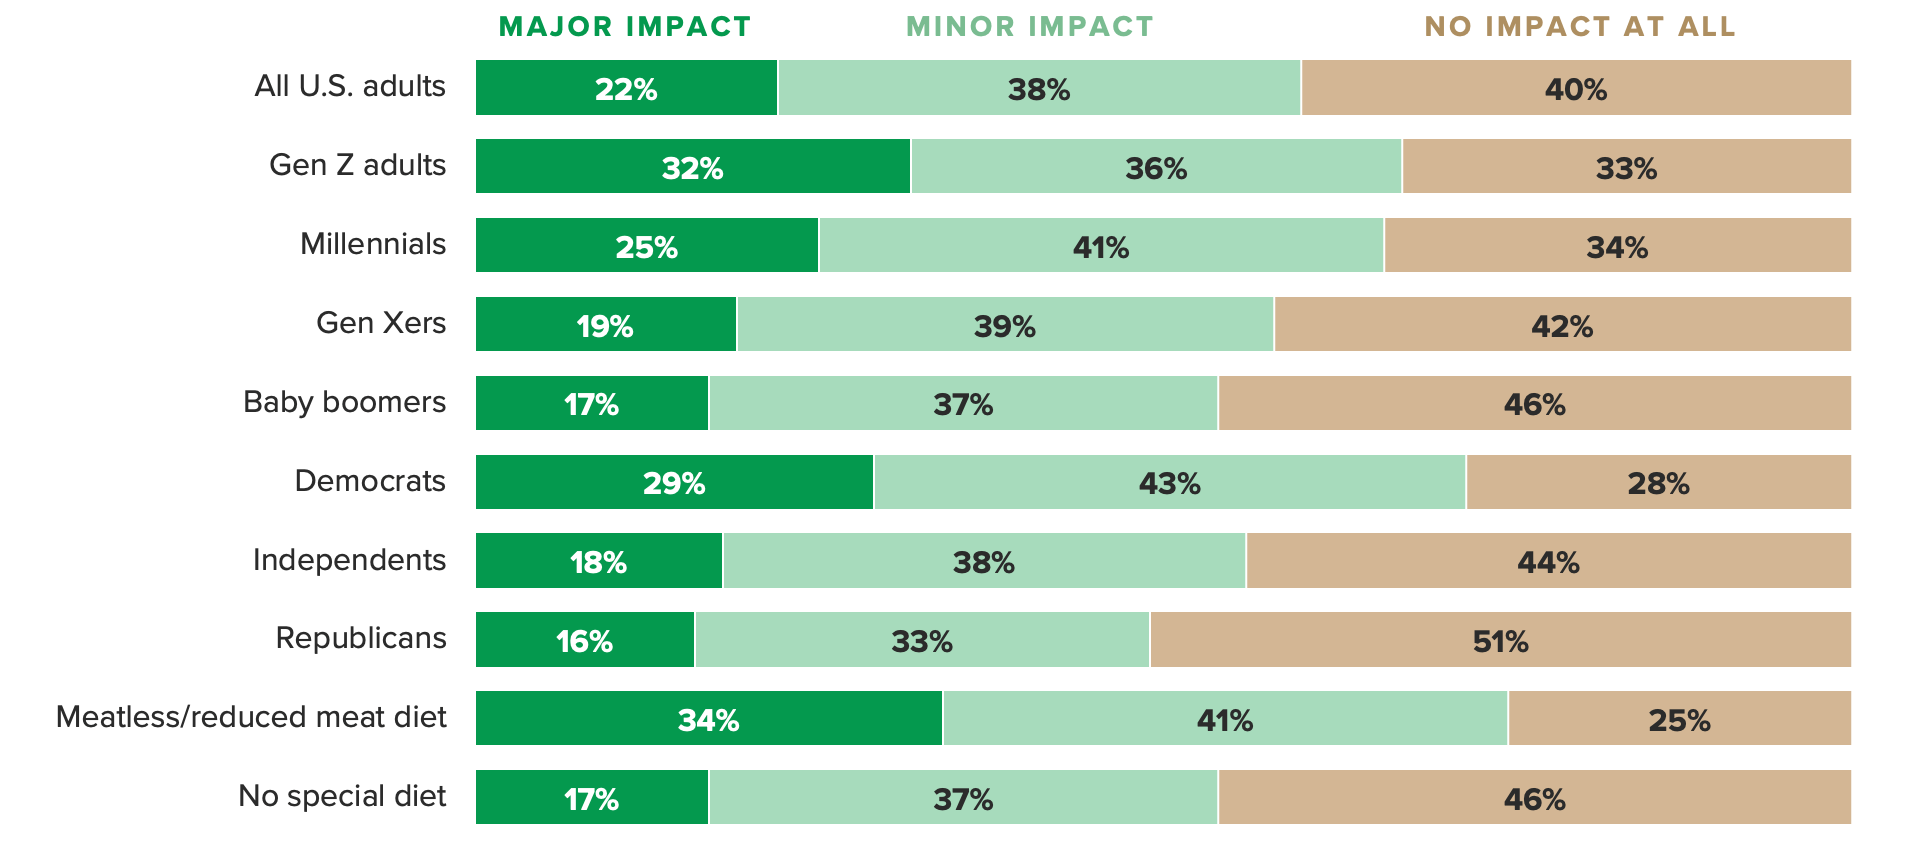 Clustered bar chart showing how much of an impact climate change has on respondents' eating and drinking behaviors. The data shows younger generations are more likely to say climate change has an impact on their eating and drinking behaviors.